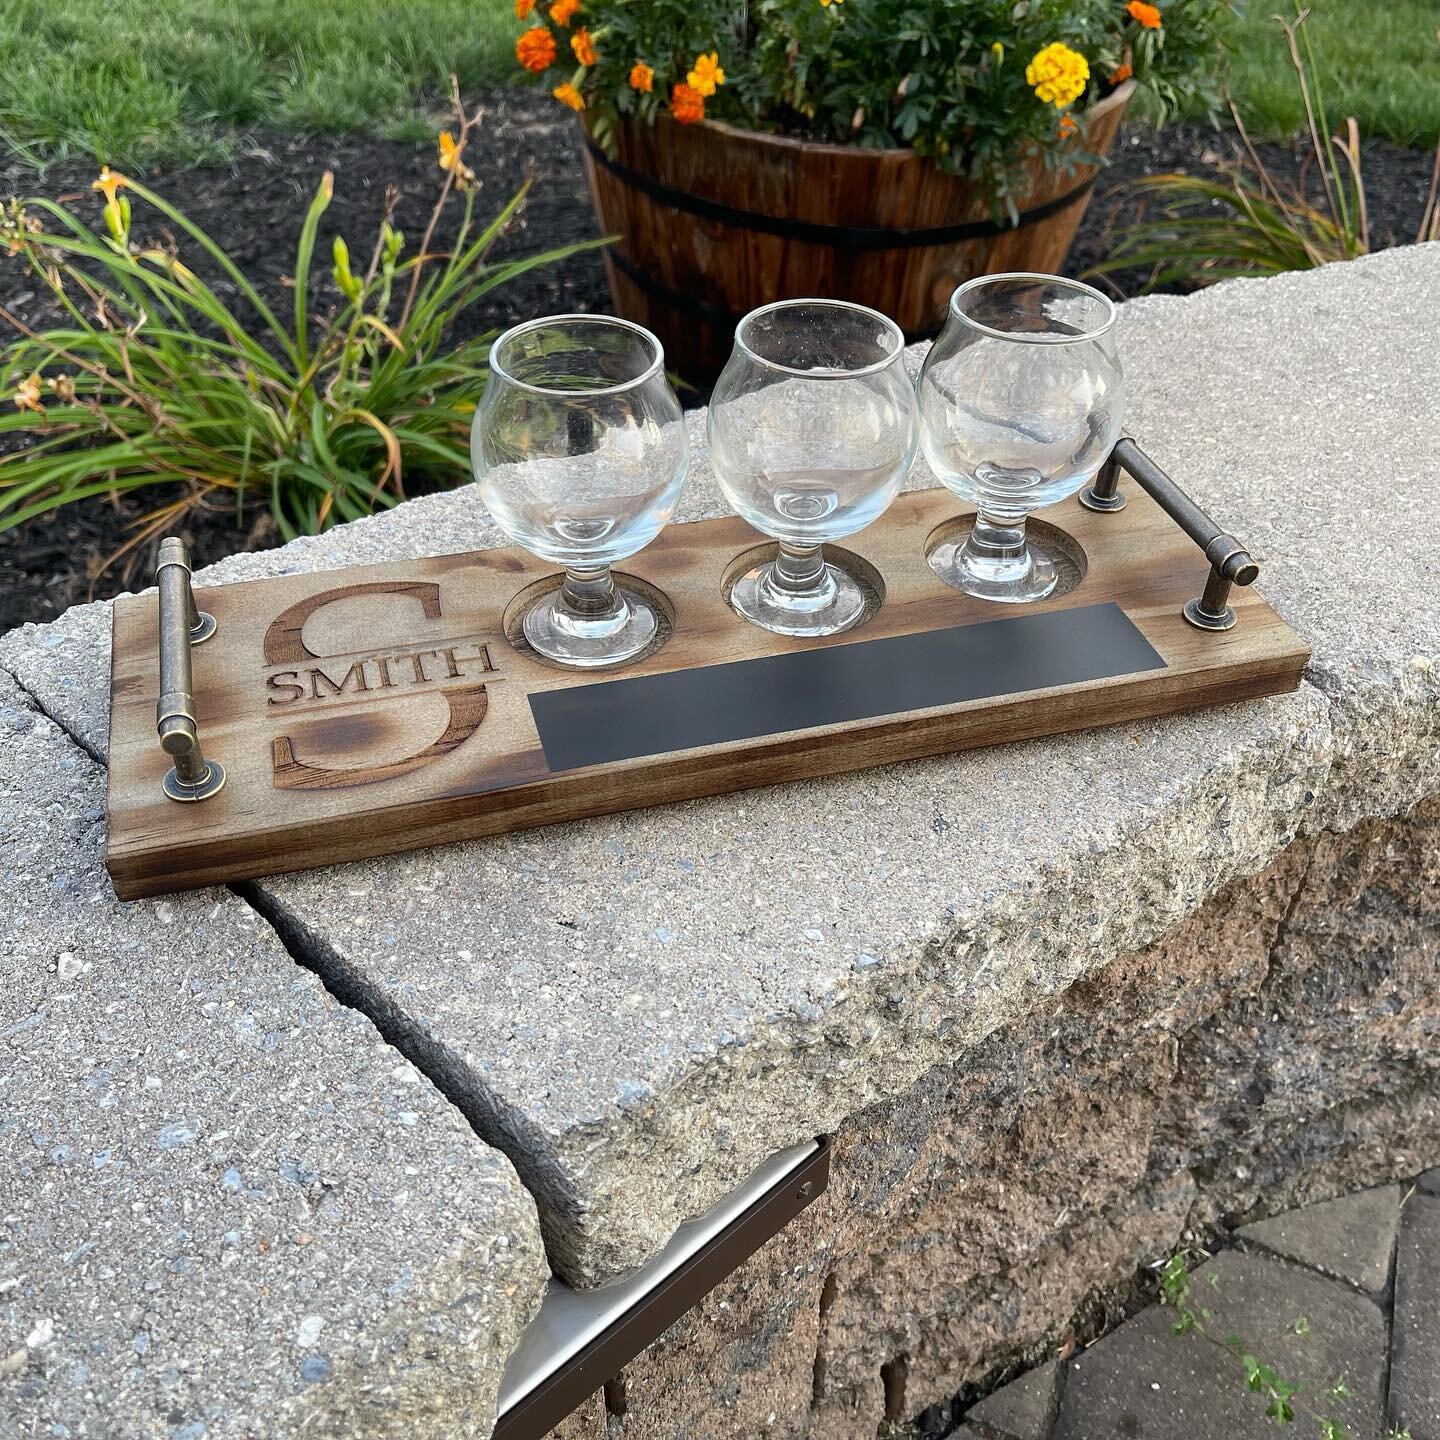 Check out the flight design!  Now available!  #woodworking #beerflight #whiskeyflight #whiskey #craftbeer #beer #scotch #scotchflight#whisky #whiskyflight #bourbon